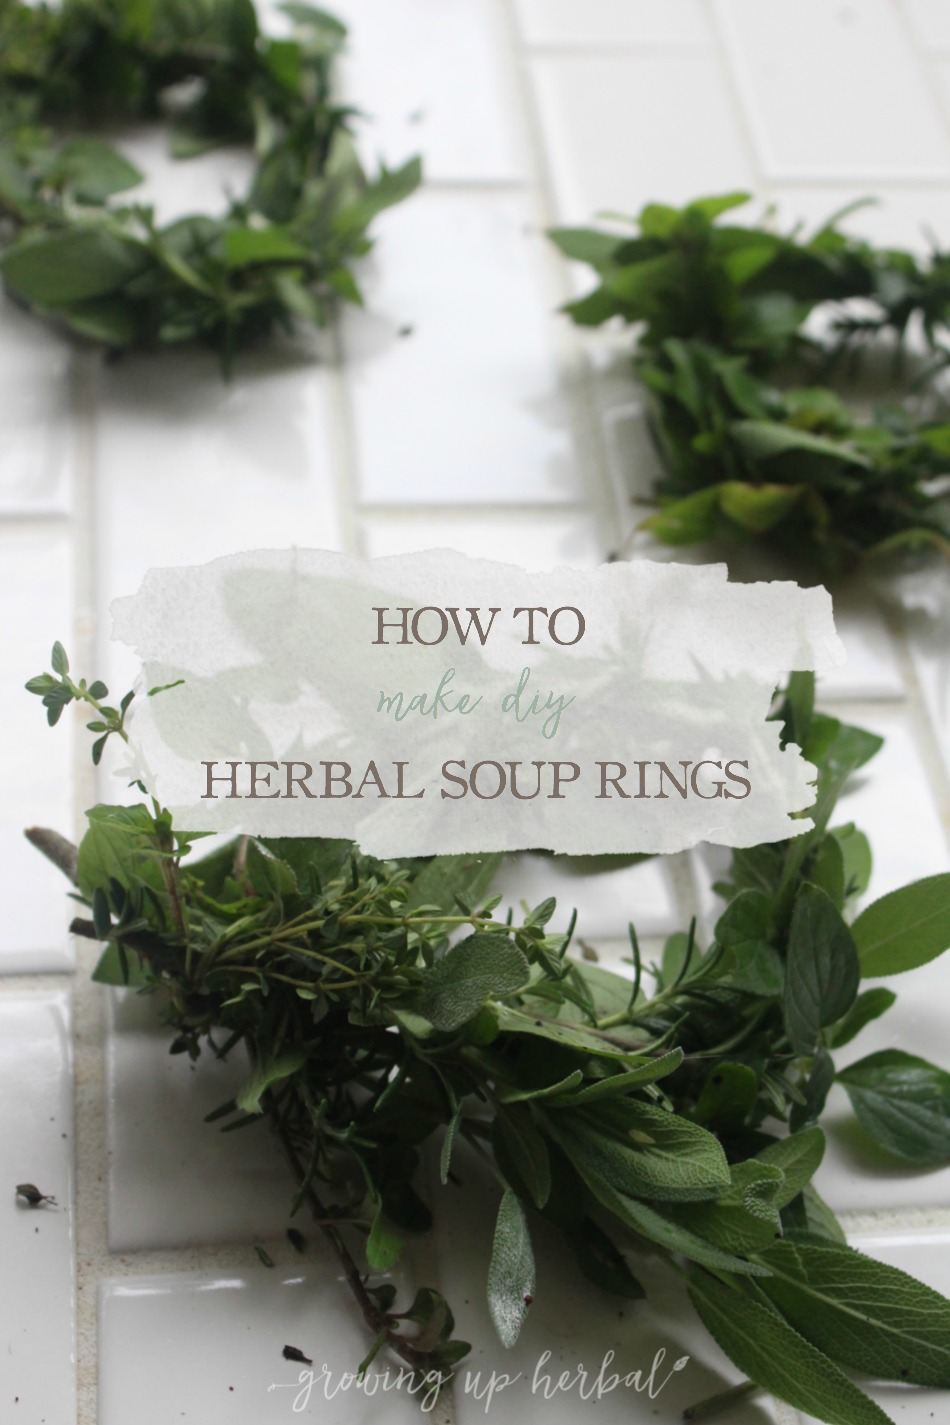 How To Make DIY Herbal Soup Rings | Growing Up Herbal | Take your water-based foods to the next level by using these herbal soup rings to amp up the flavor and nutritional benefits! Learn to make them in this post.